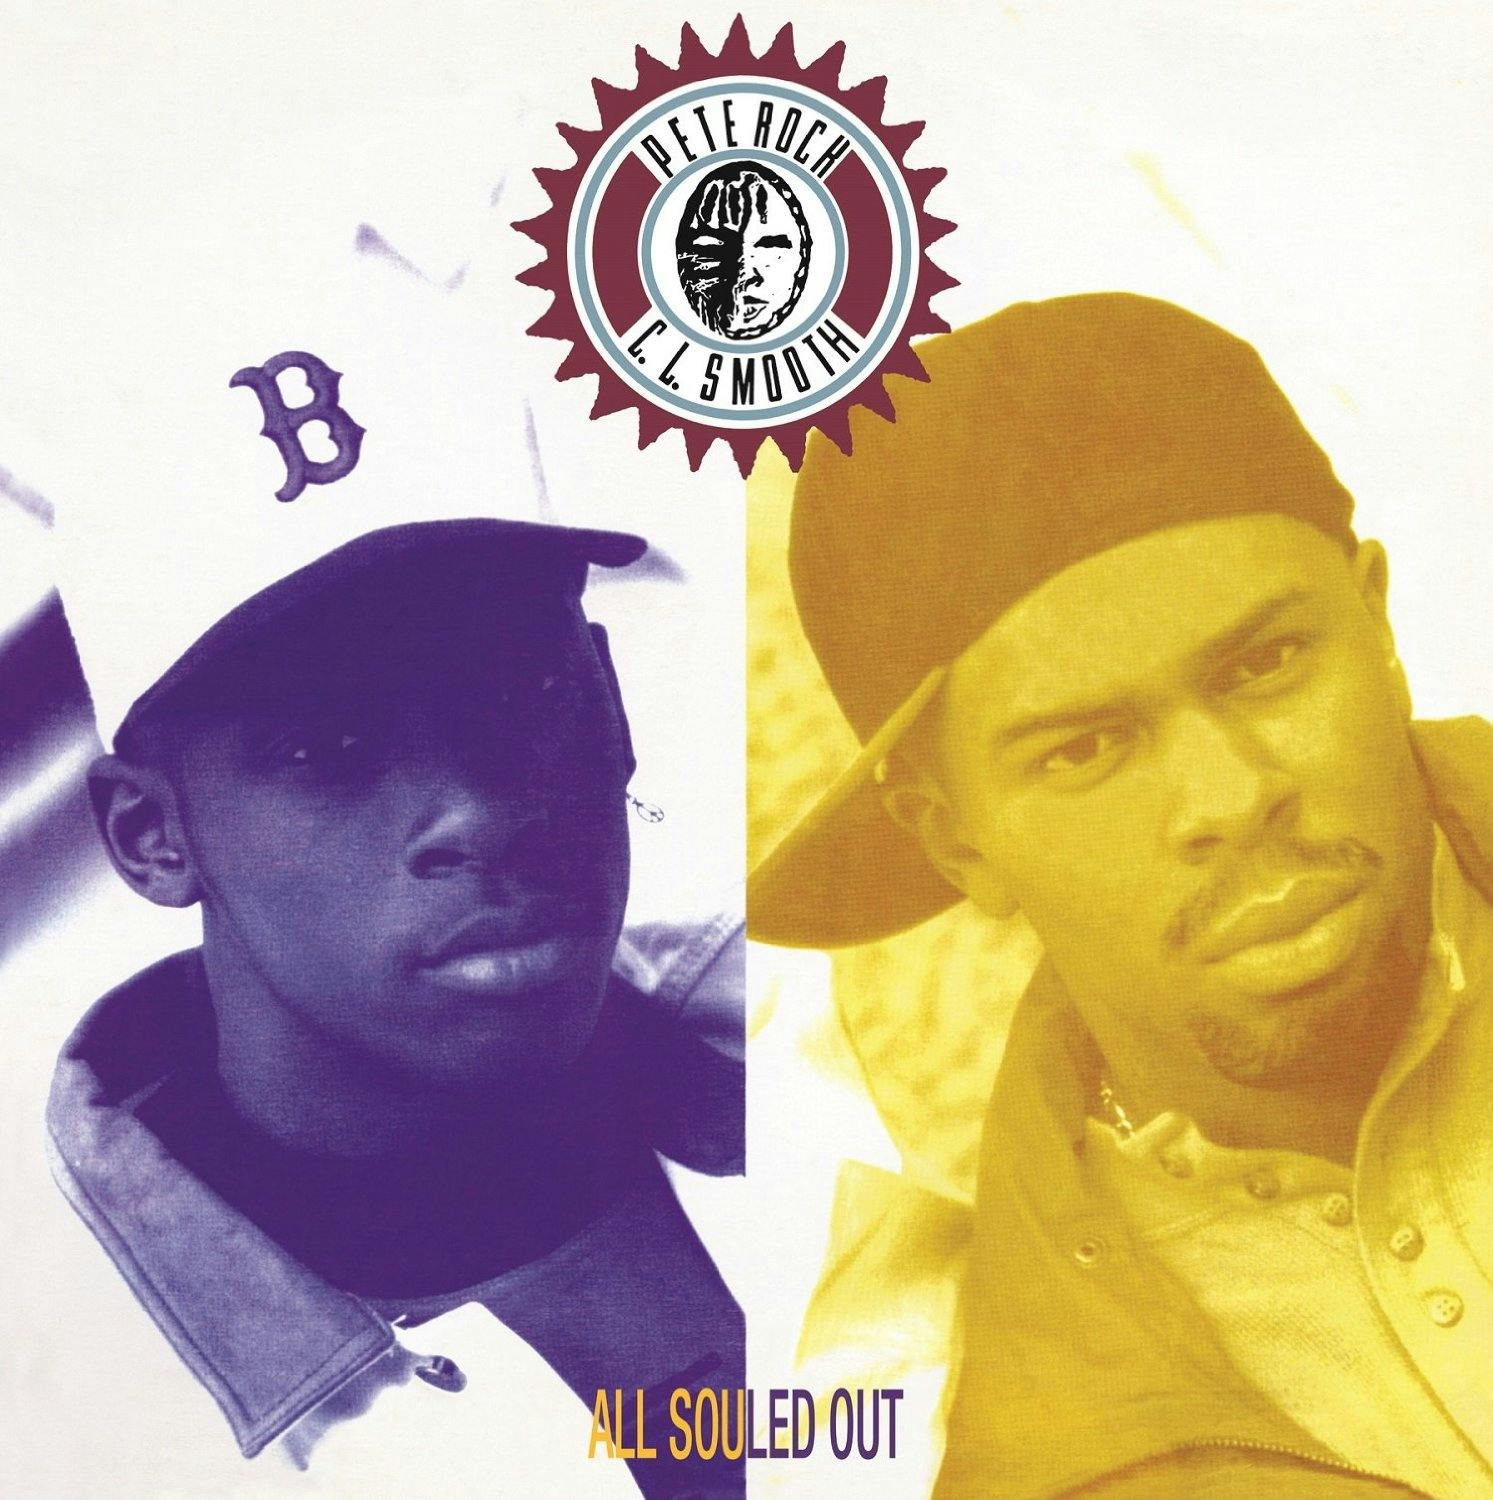 ALL SOULED OUT by Pete Rock & C.L. Smooth